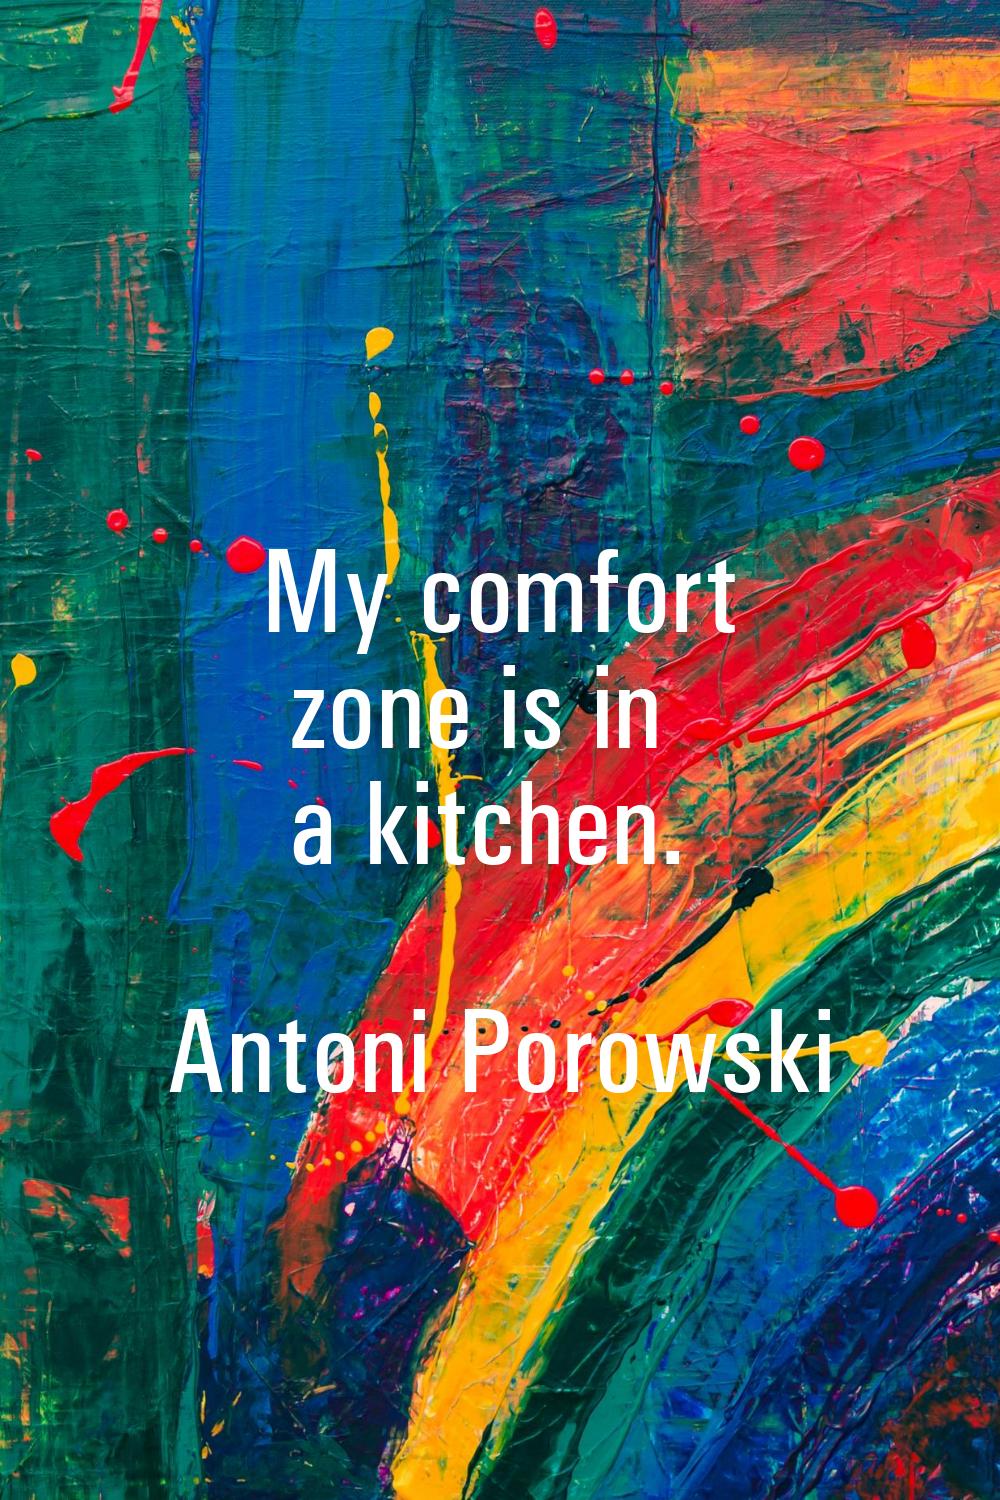 My comfort zone is in a kitchen.